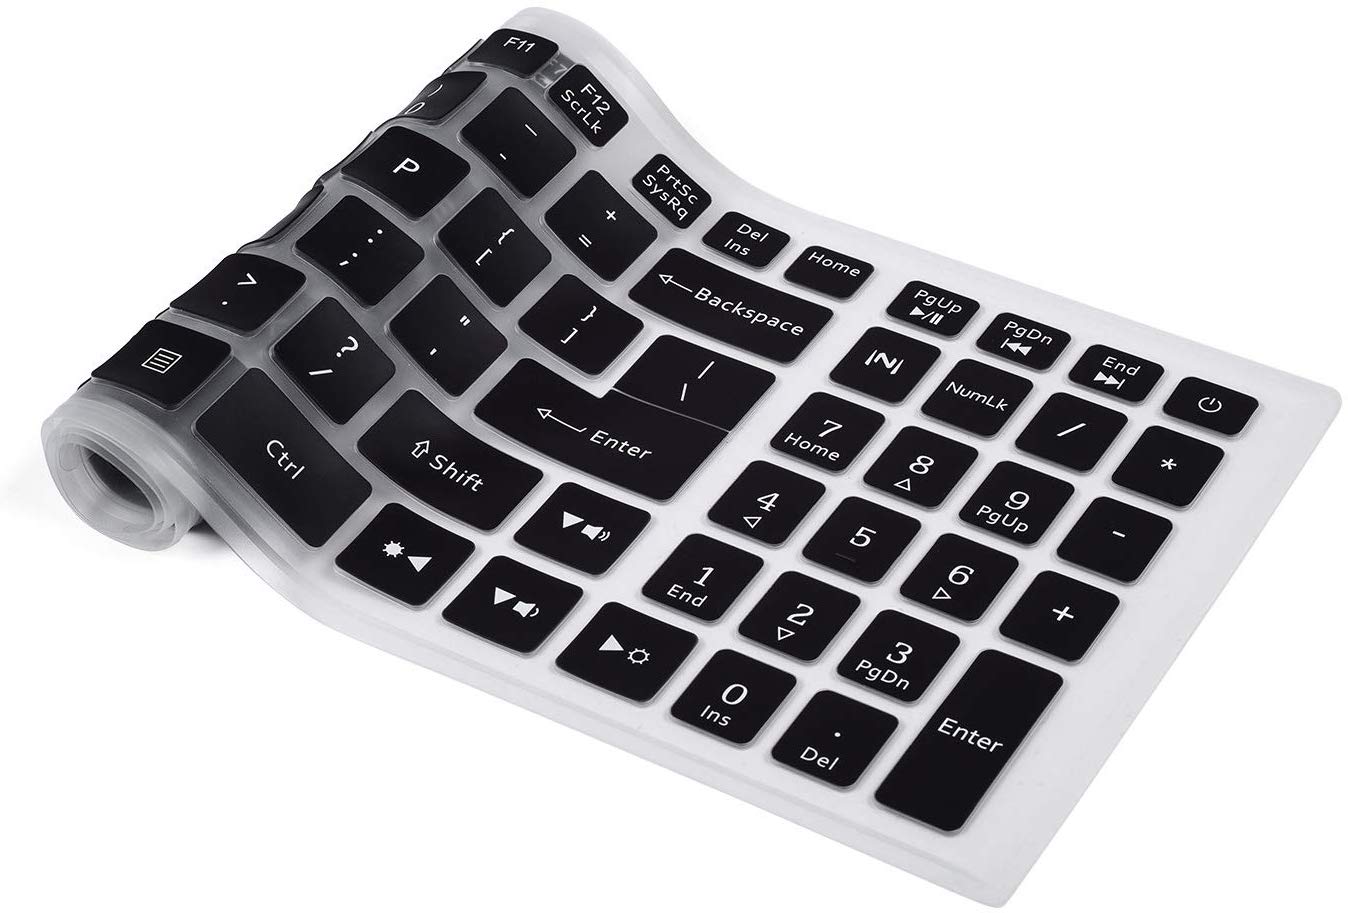 Silicone Keyboard Skin Cover for Acer Predator Helios 300 15.6